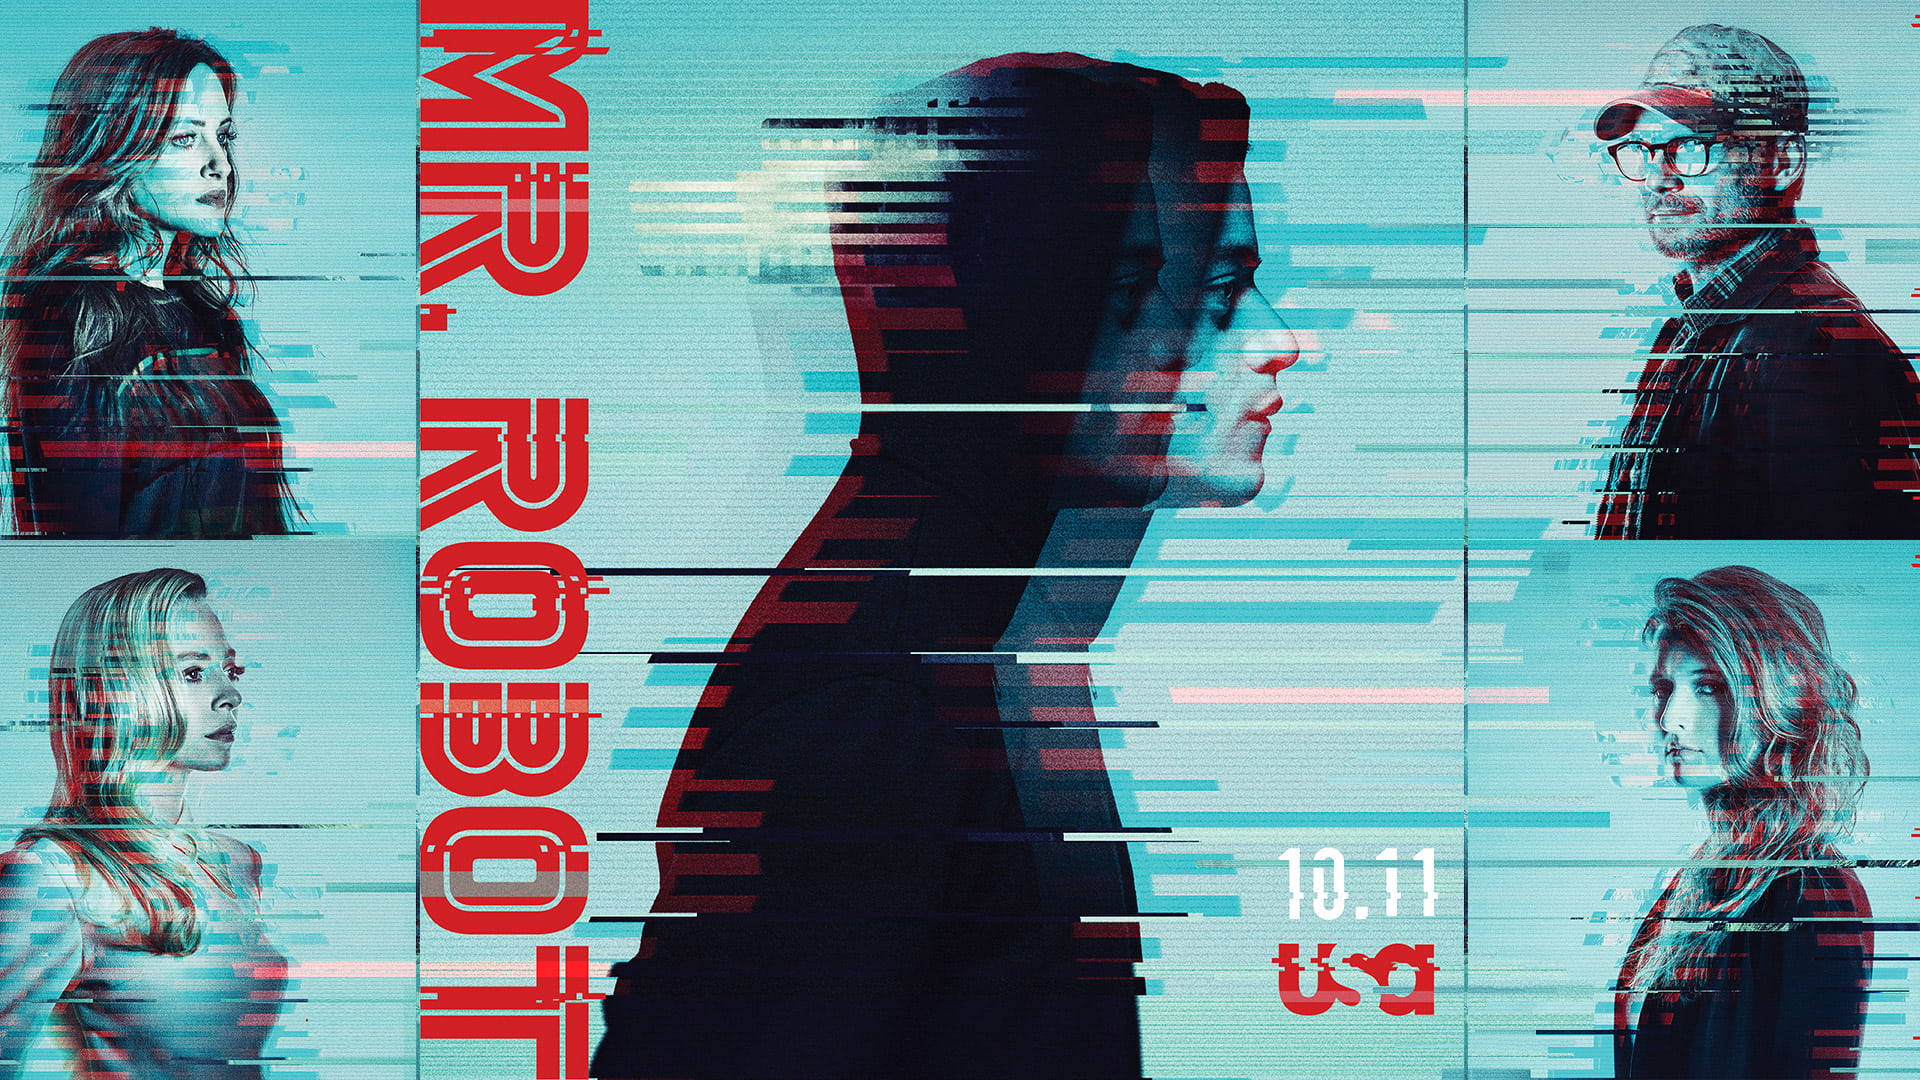 Mr. Robot Season 3 Characters Poster Background